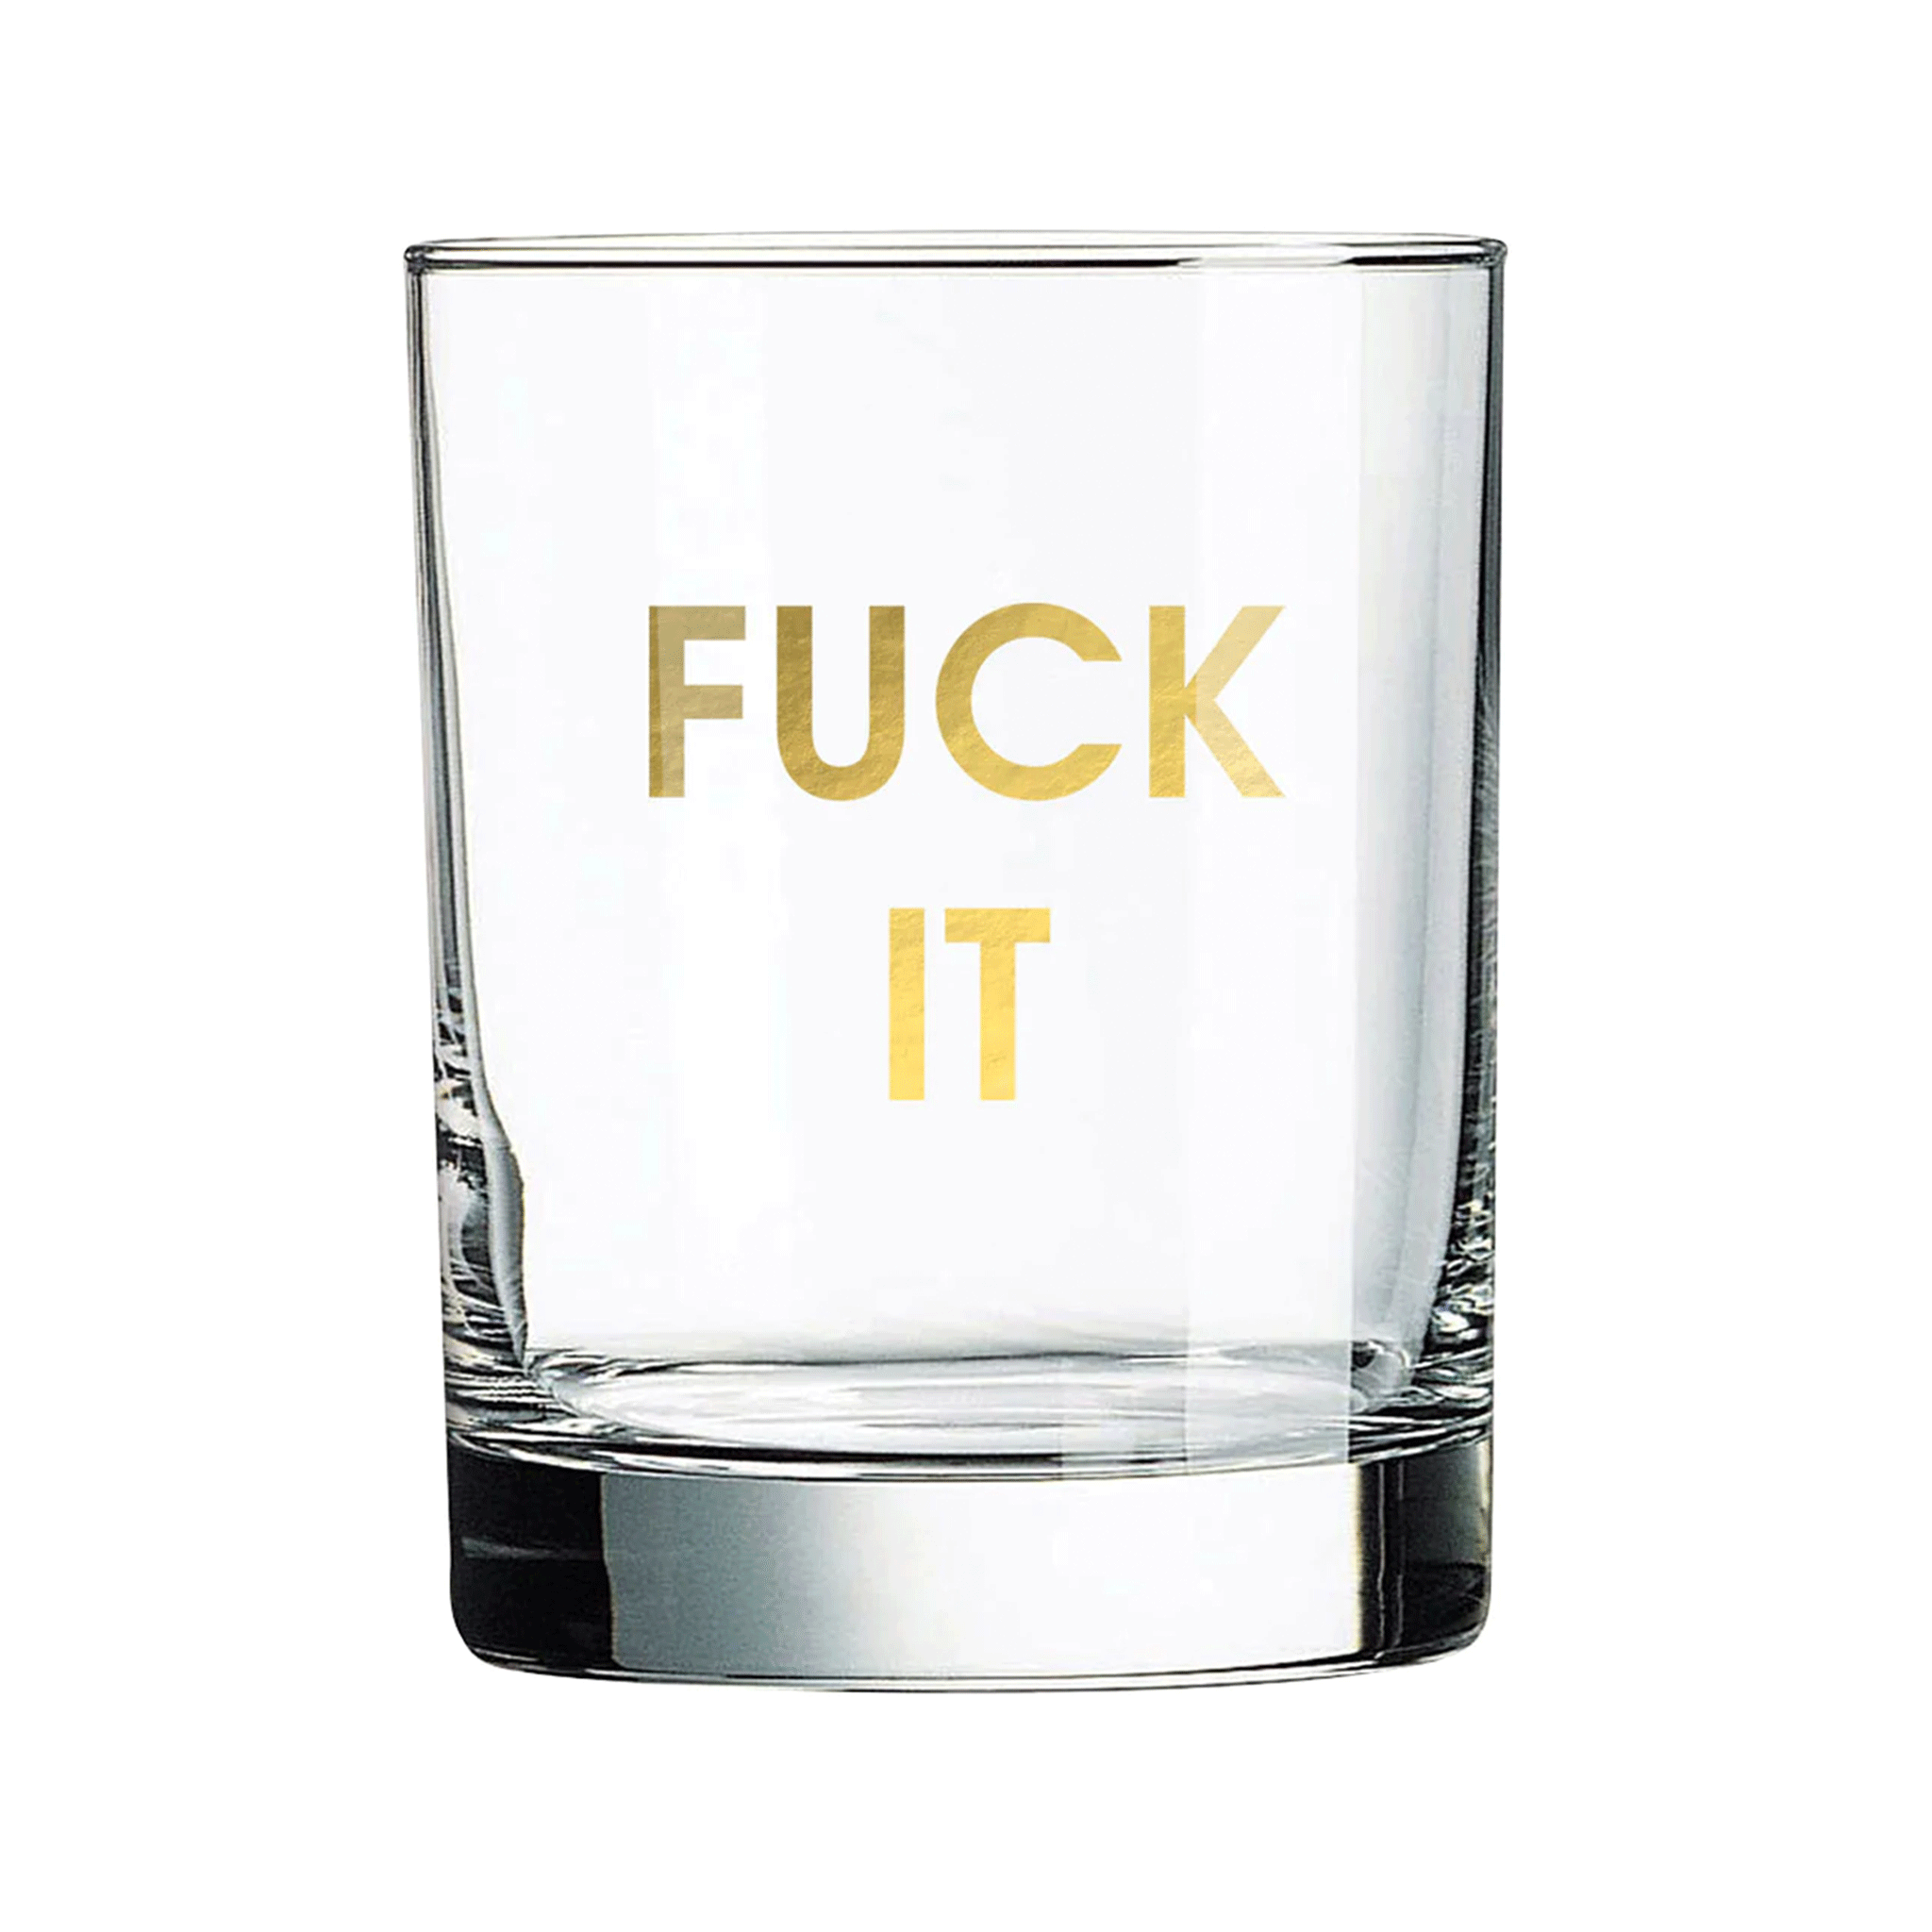 On a white background is a clear glass mug with gold text across the front that reads, &quot;Fuck It&quot;.